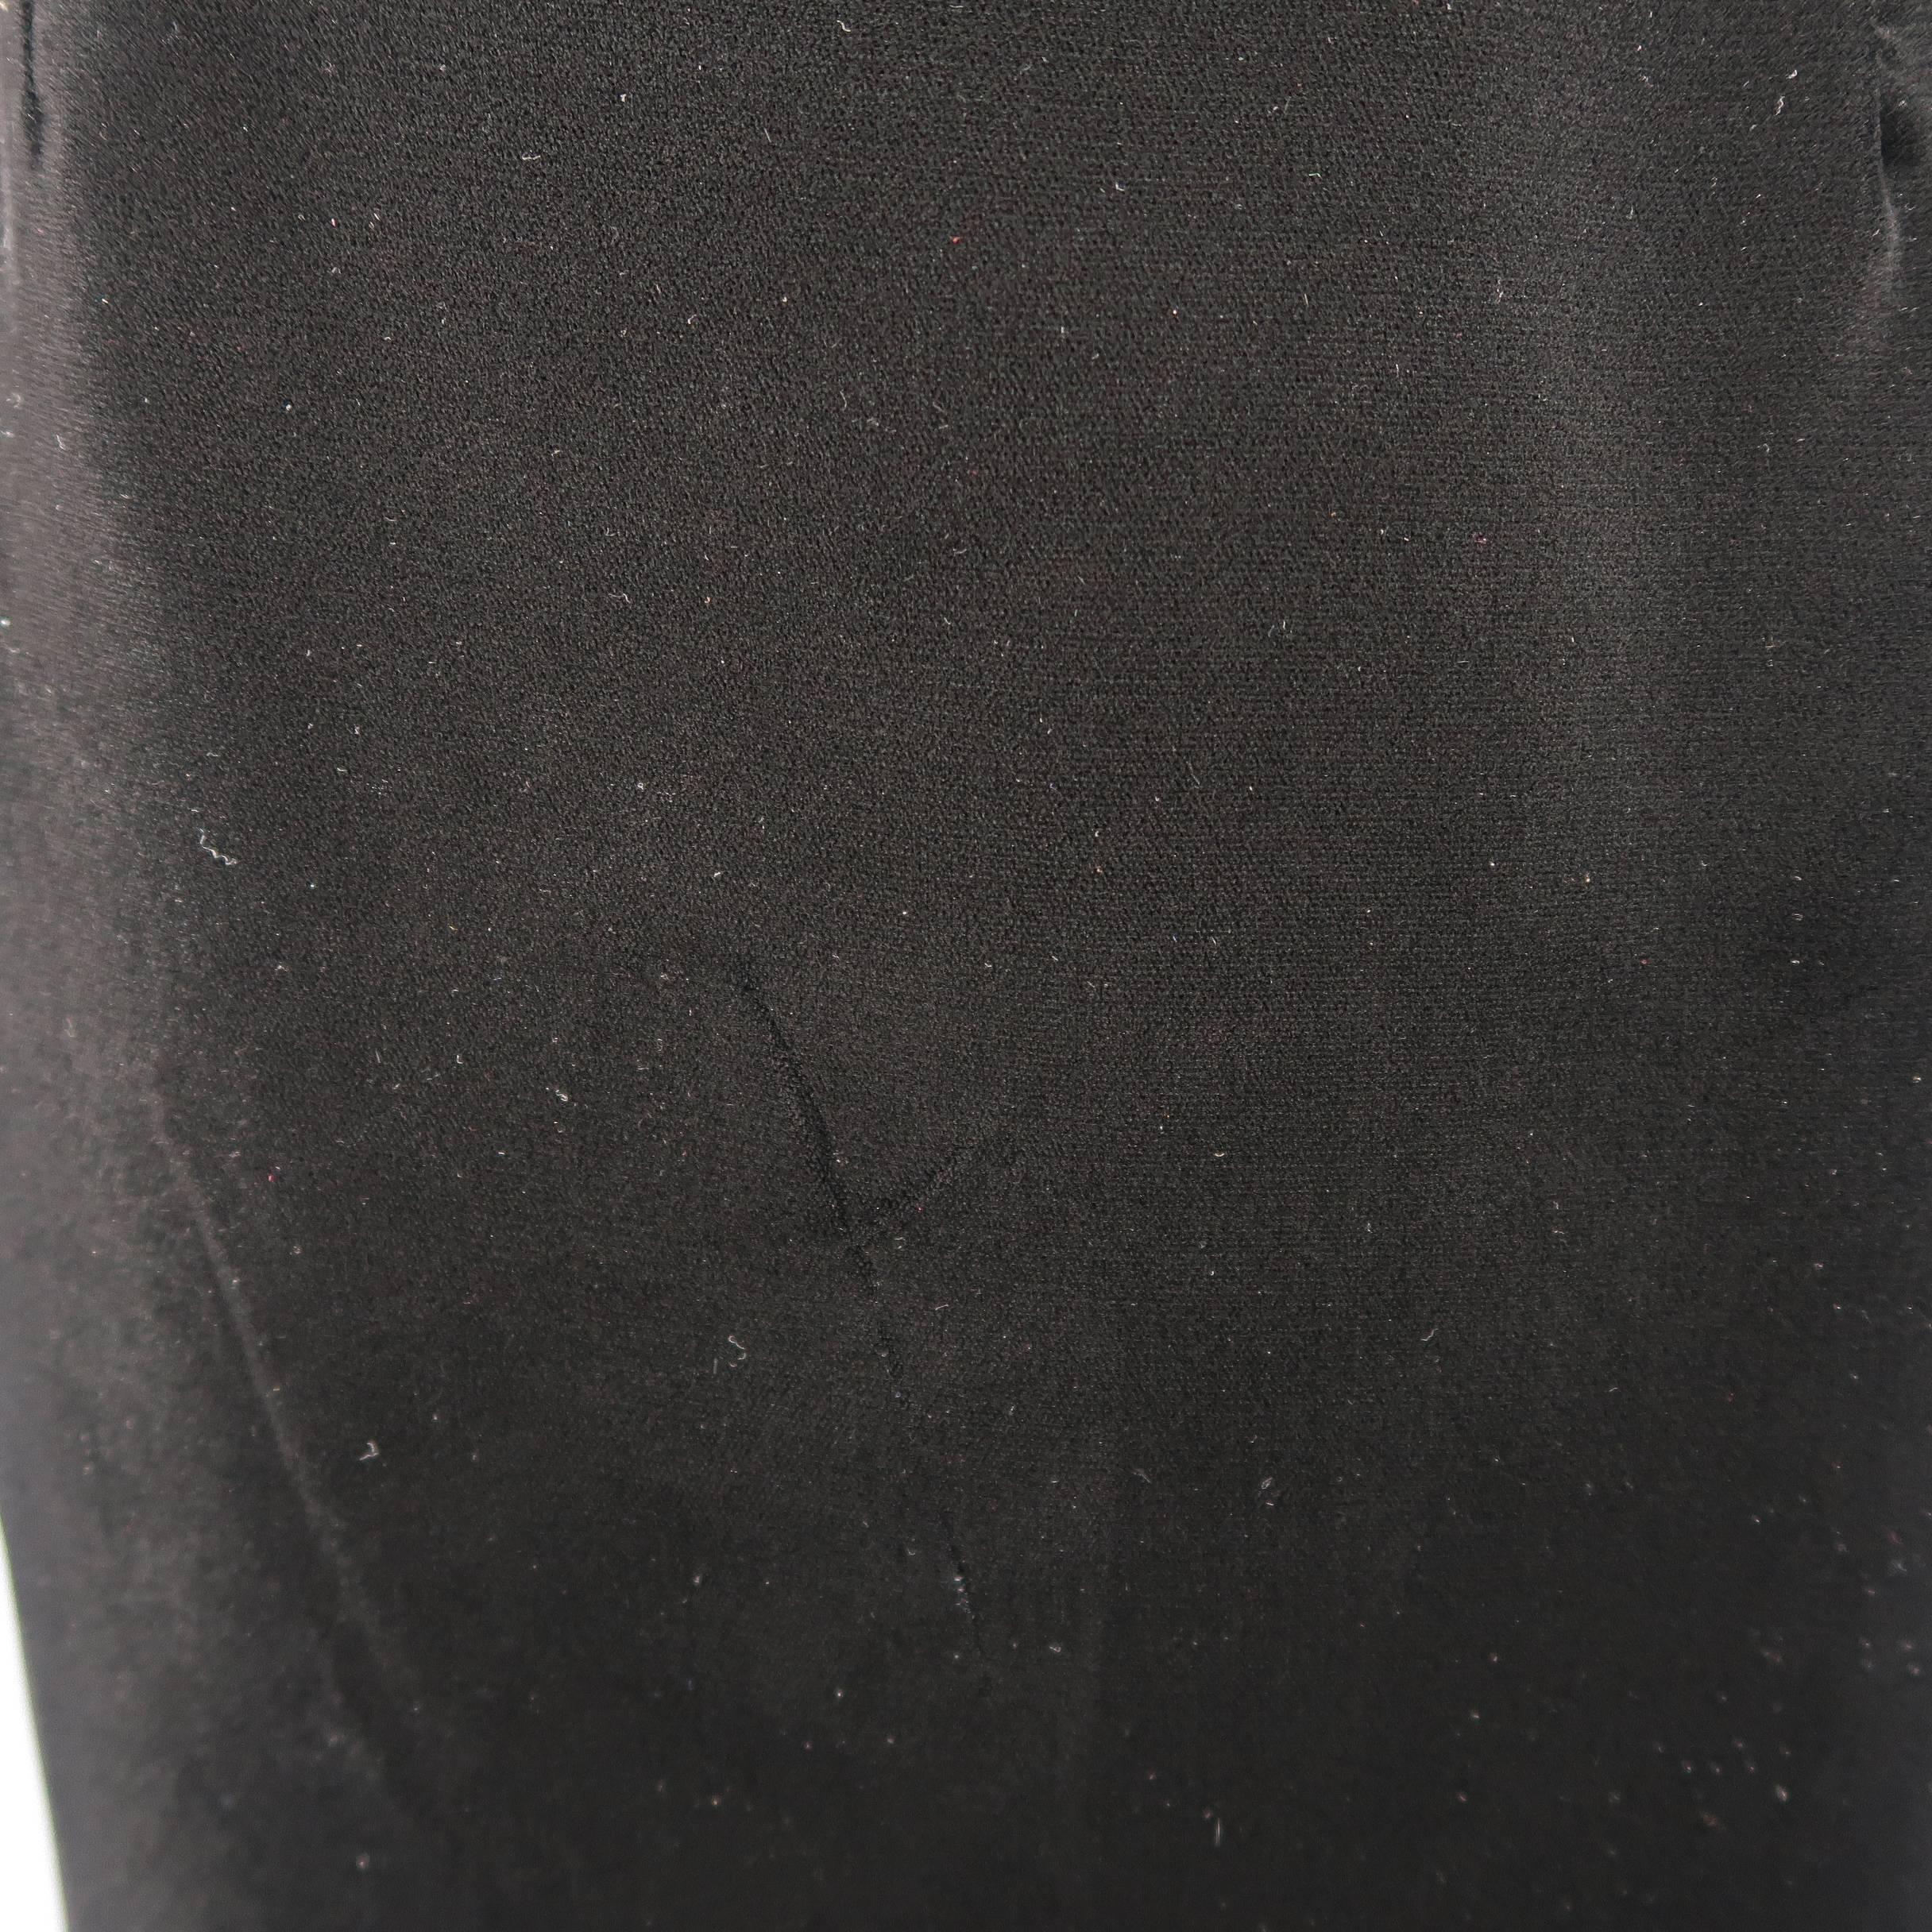 Archive GUCCI skirt comes in black velvet with a classic straight pencil silhouette and buttoned side tabs. Made in Italy.
 
Good Pre-Owned Condition.
Marked: IT 46
 
Measurements:
 
Waist: 29 in.
Hip: 39 in.
Length: 25 in.
